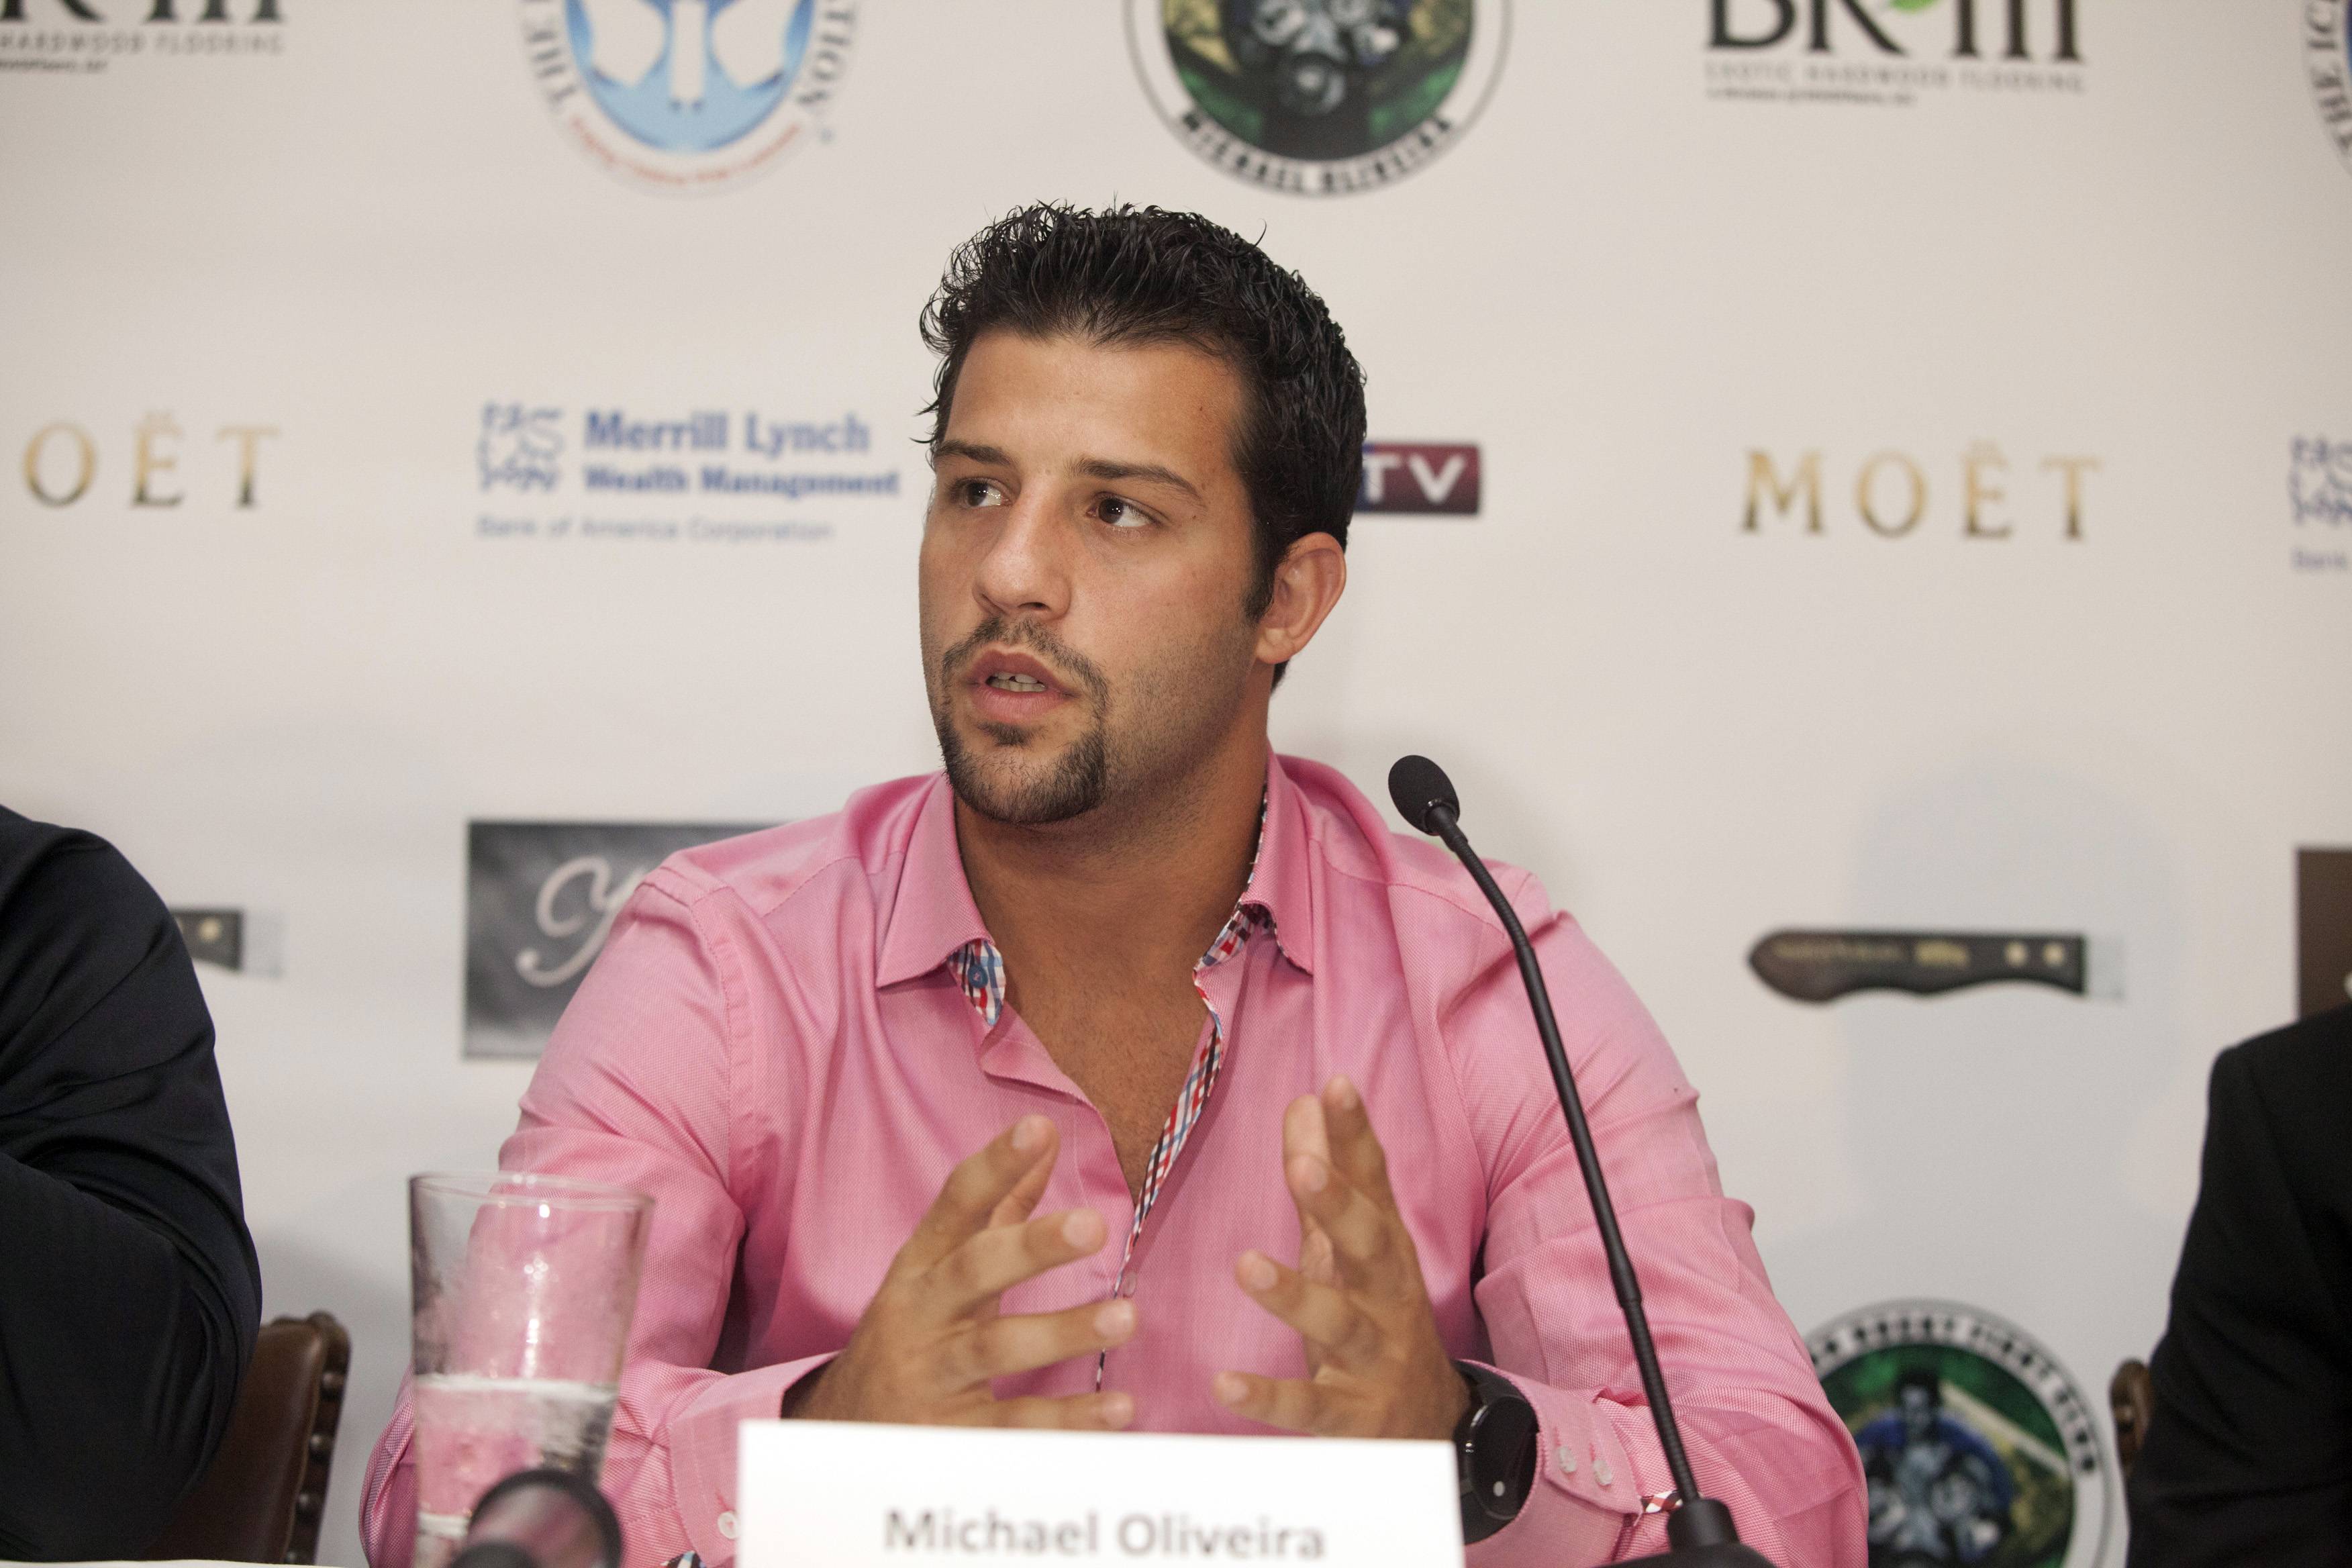 Michael Oliveira Press Conference